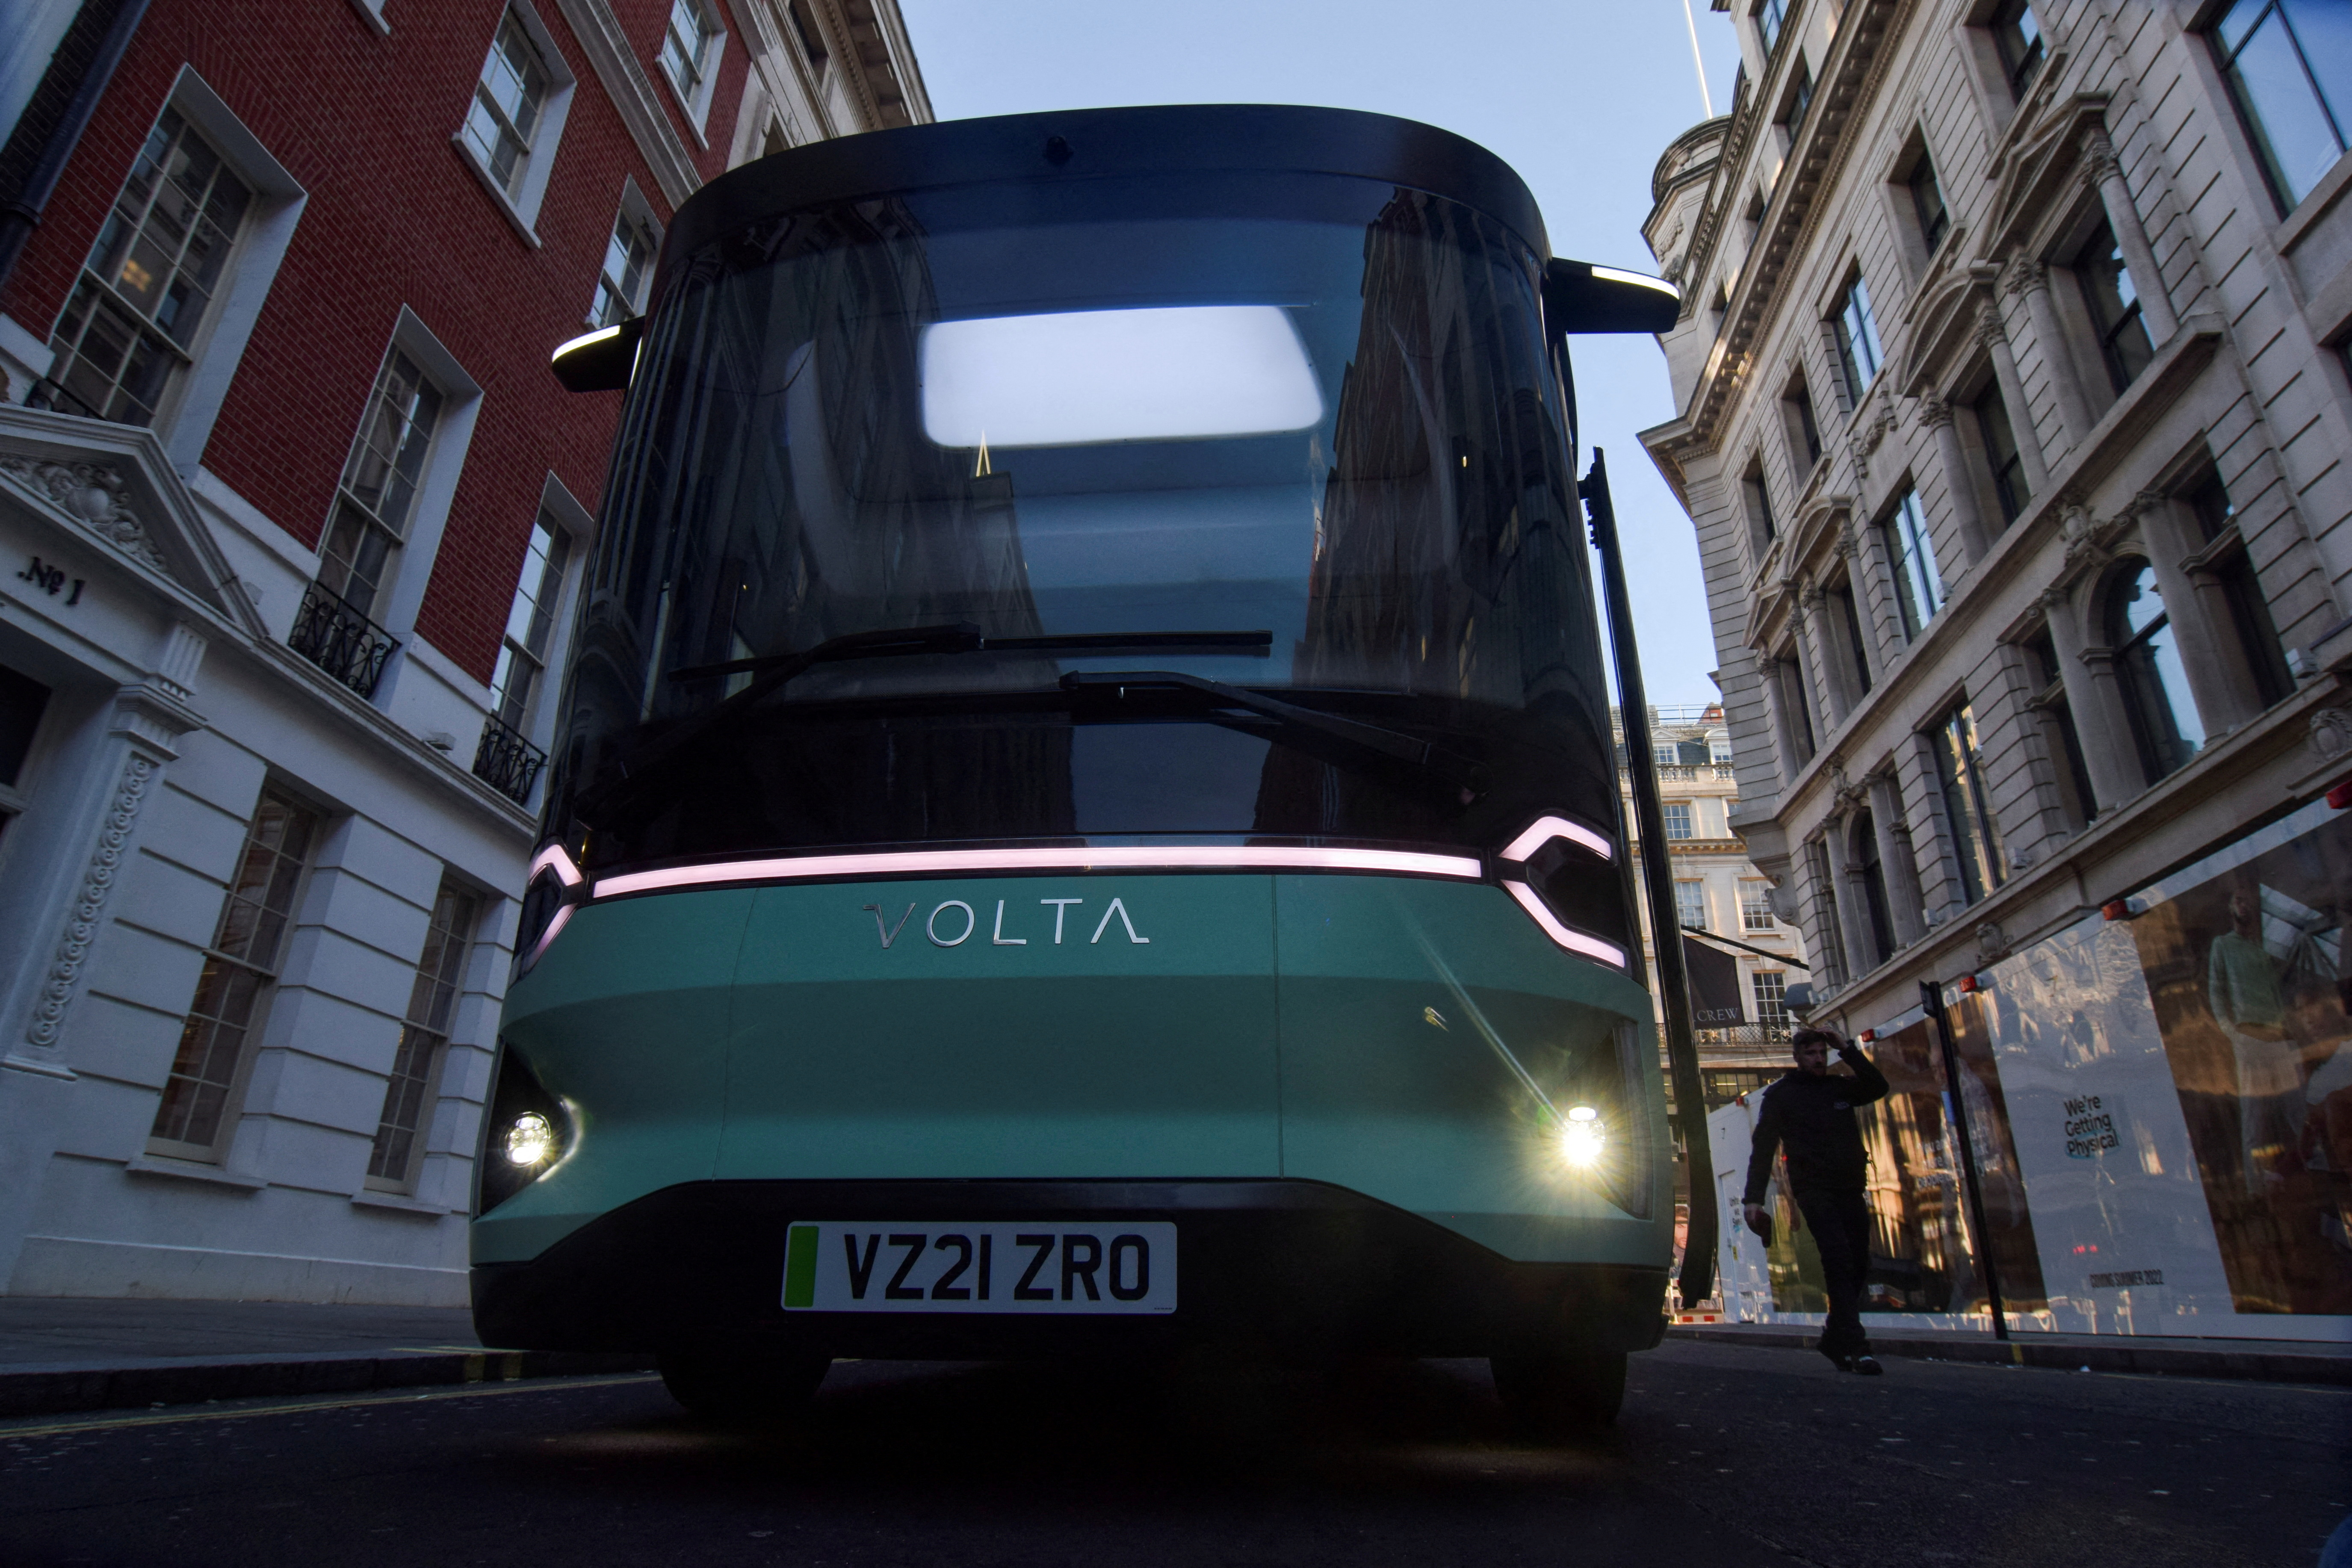 A prototype of the Volta Zero, a 16-tonne electric truck that Volta Trucks will start mass producing in late 2022, is displayed in central London